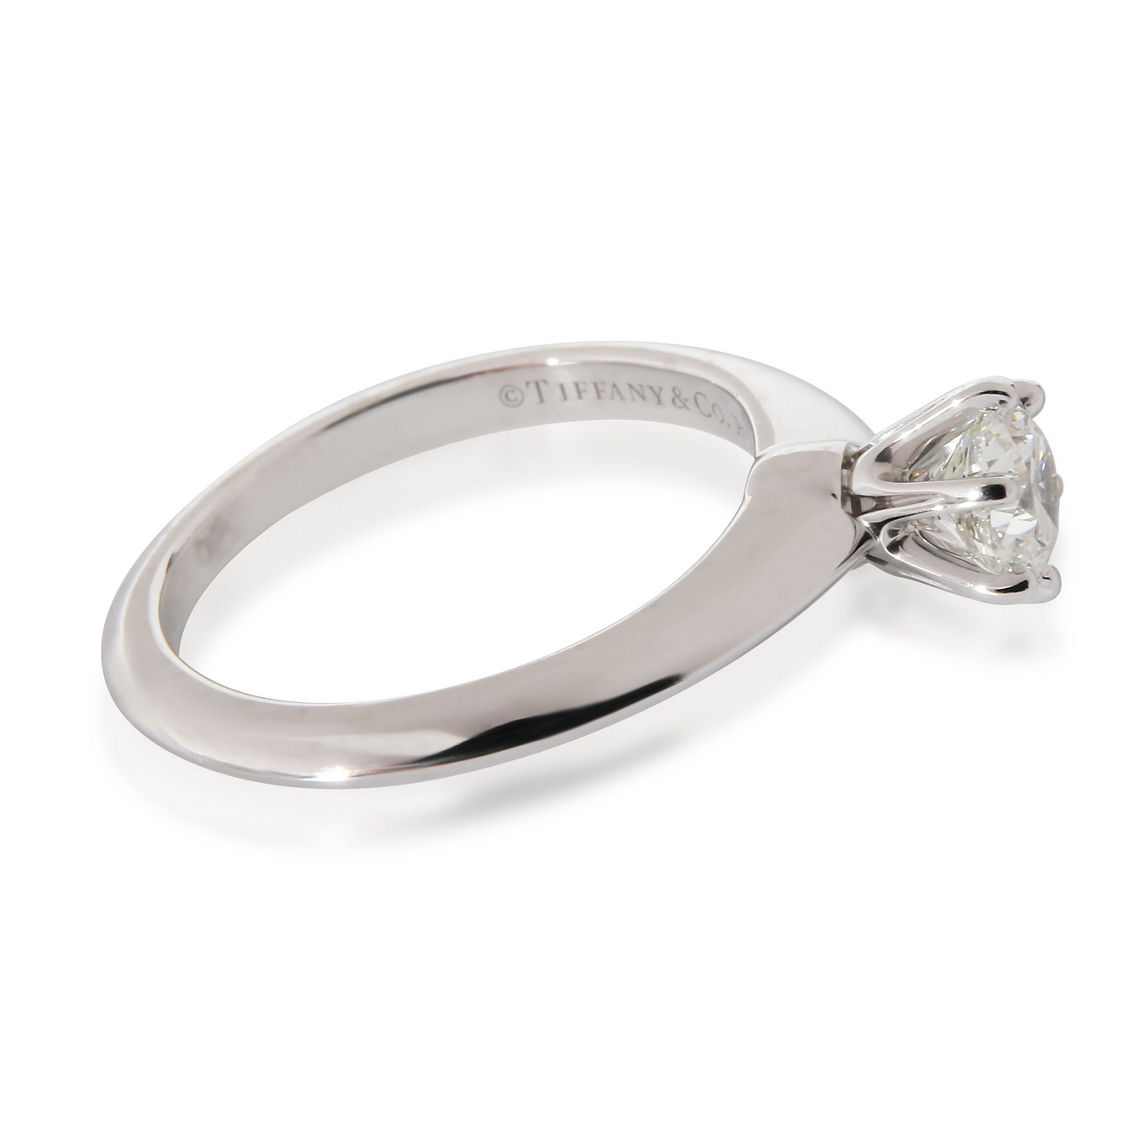 Tiffany & Co. Tiffany Setting Engagement Ring Pre-Owned - Image 2 of 4